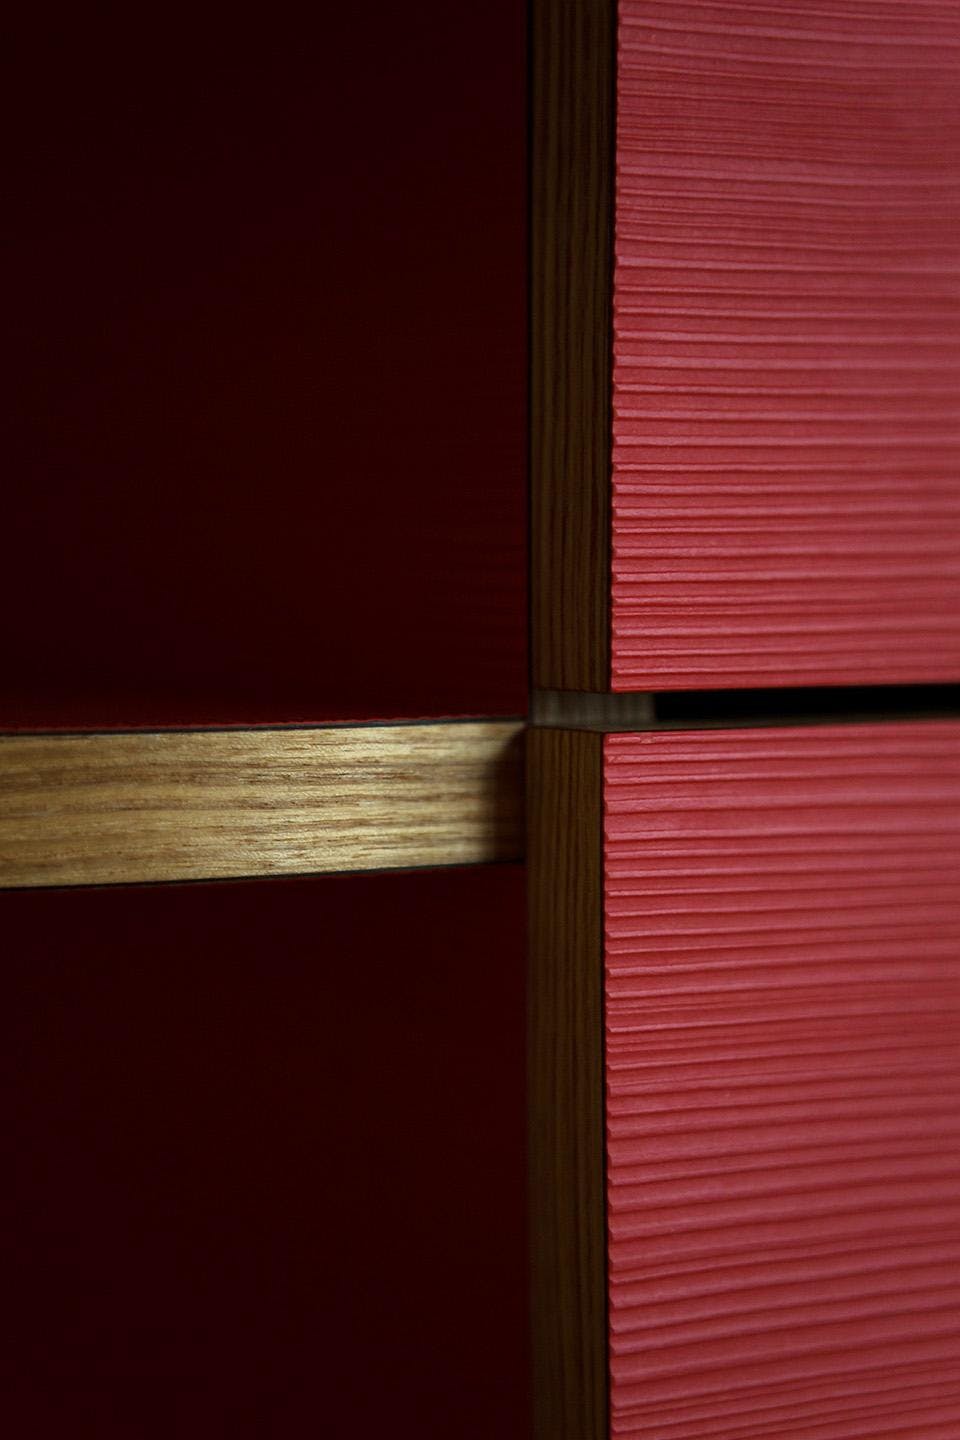 The image features a red wall with a wooden frame, which is the focal point of the scene. The wall is painted in a vibrant red color, creating a striking contrast with the wooden frame. The wooden frame is made of wood and appears to be part of the wall's design.

The wall is not particularly tall, but it is quite wide, stretching from the top left corner to the bottom right corner of the image. The wooden frame is positioned in the middle of the wall, adding depth and interest to the scene.